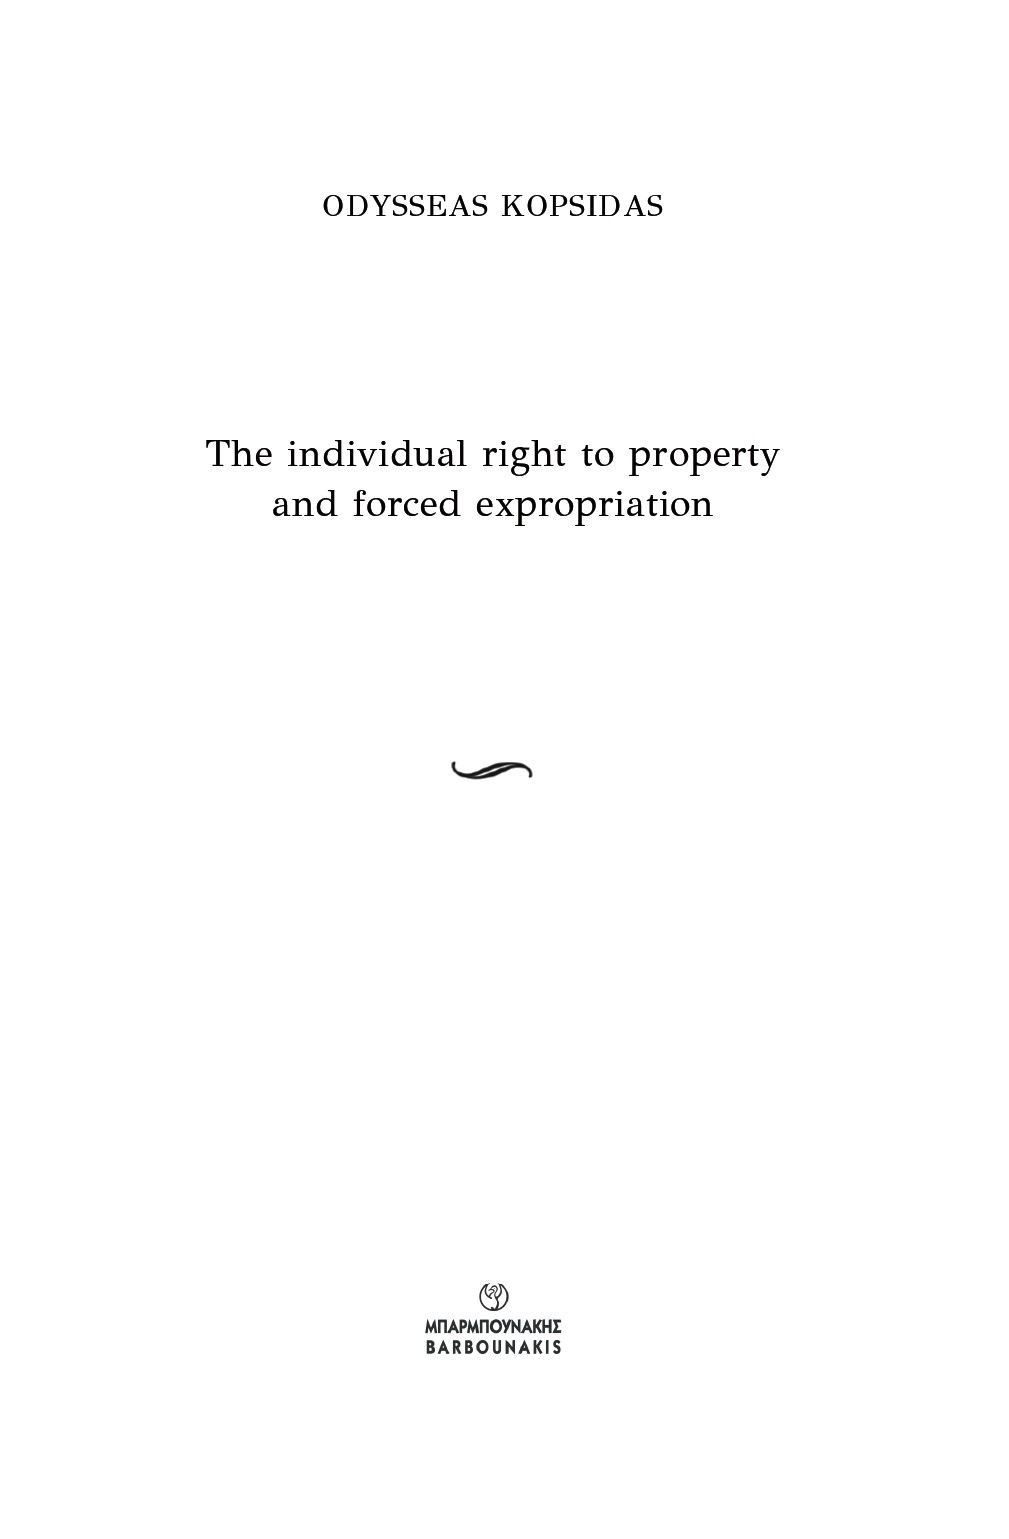 The individual right to property and forced expropriation